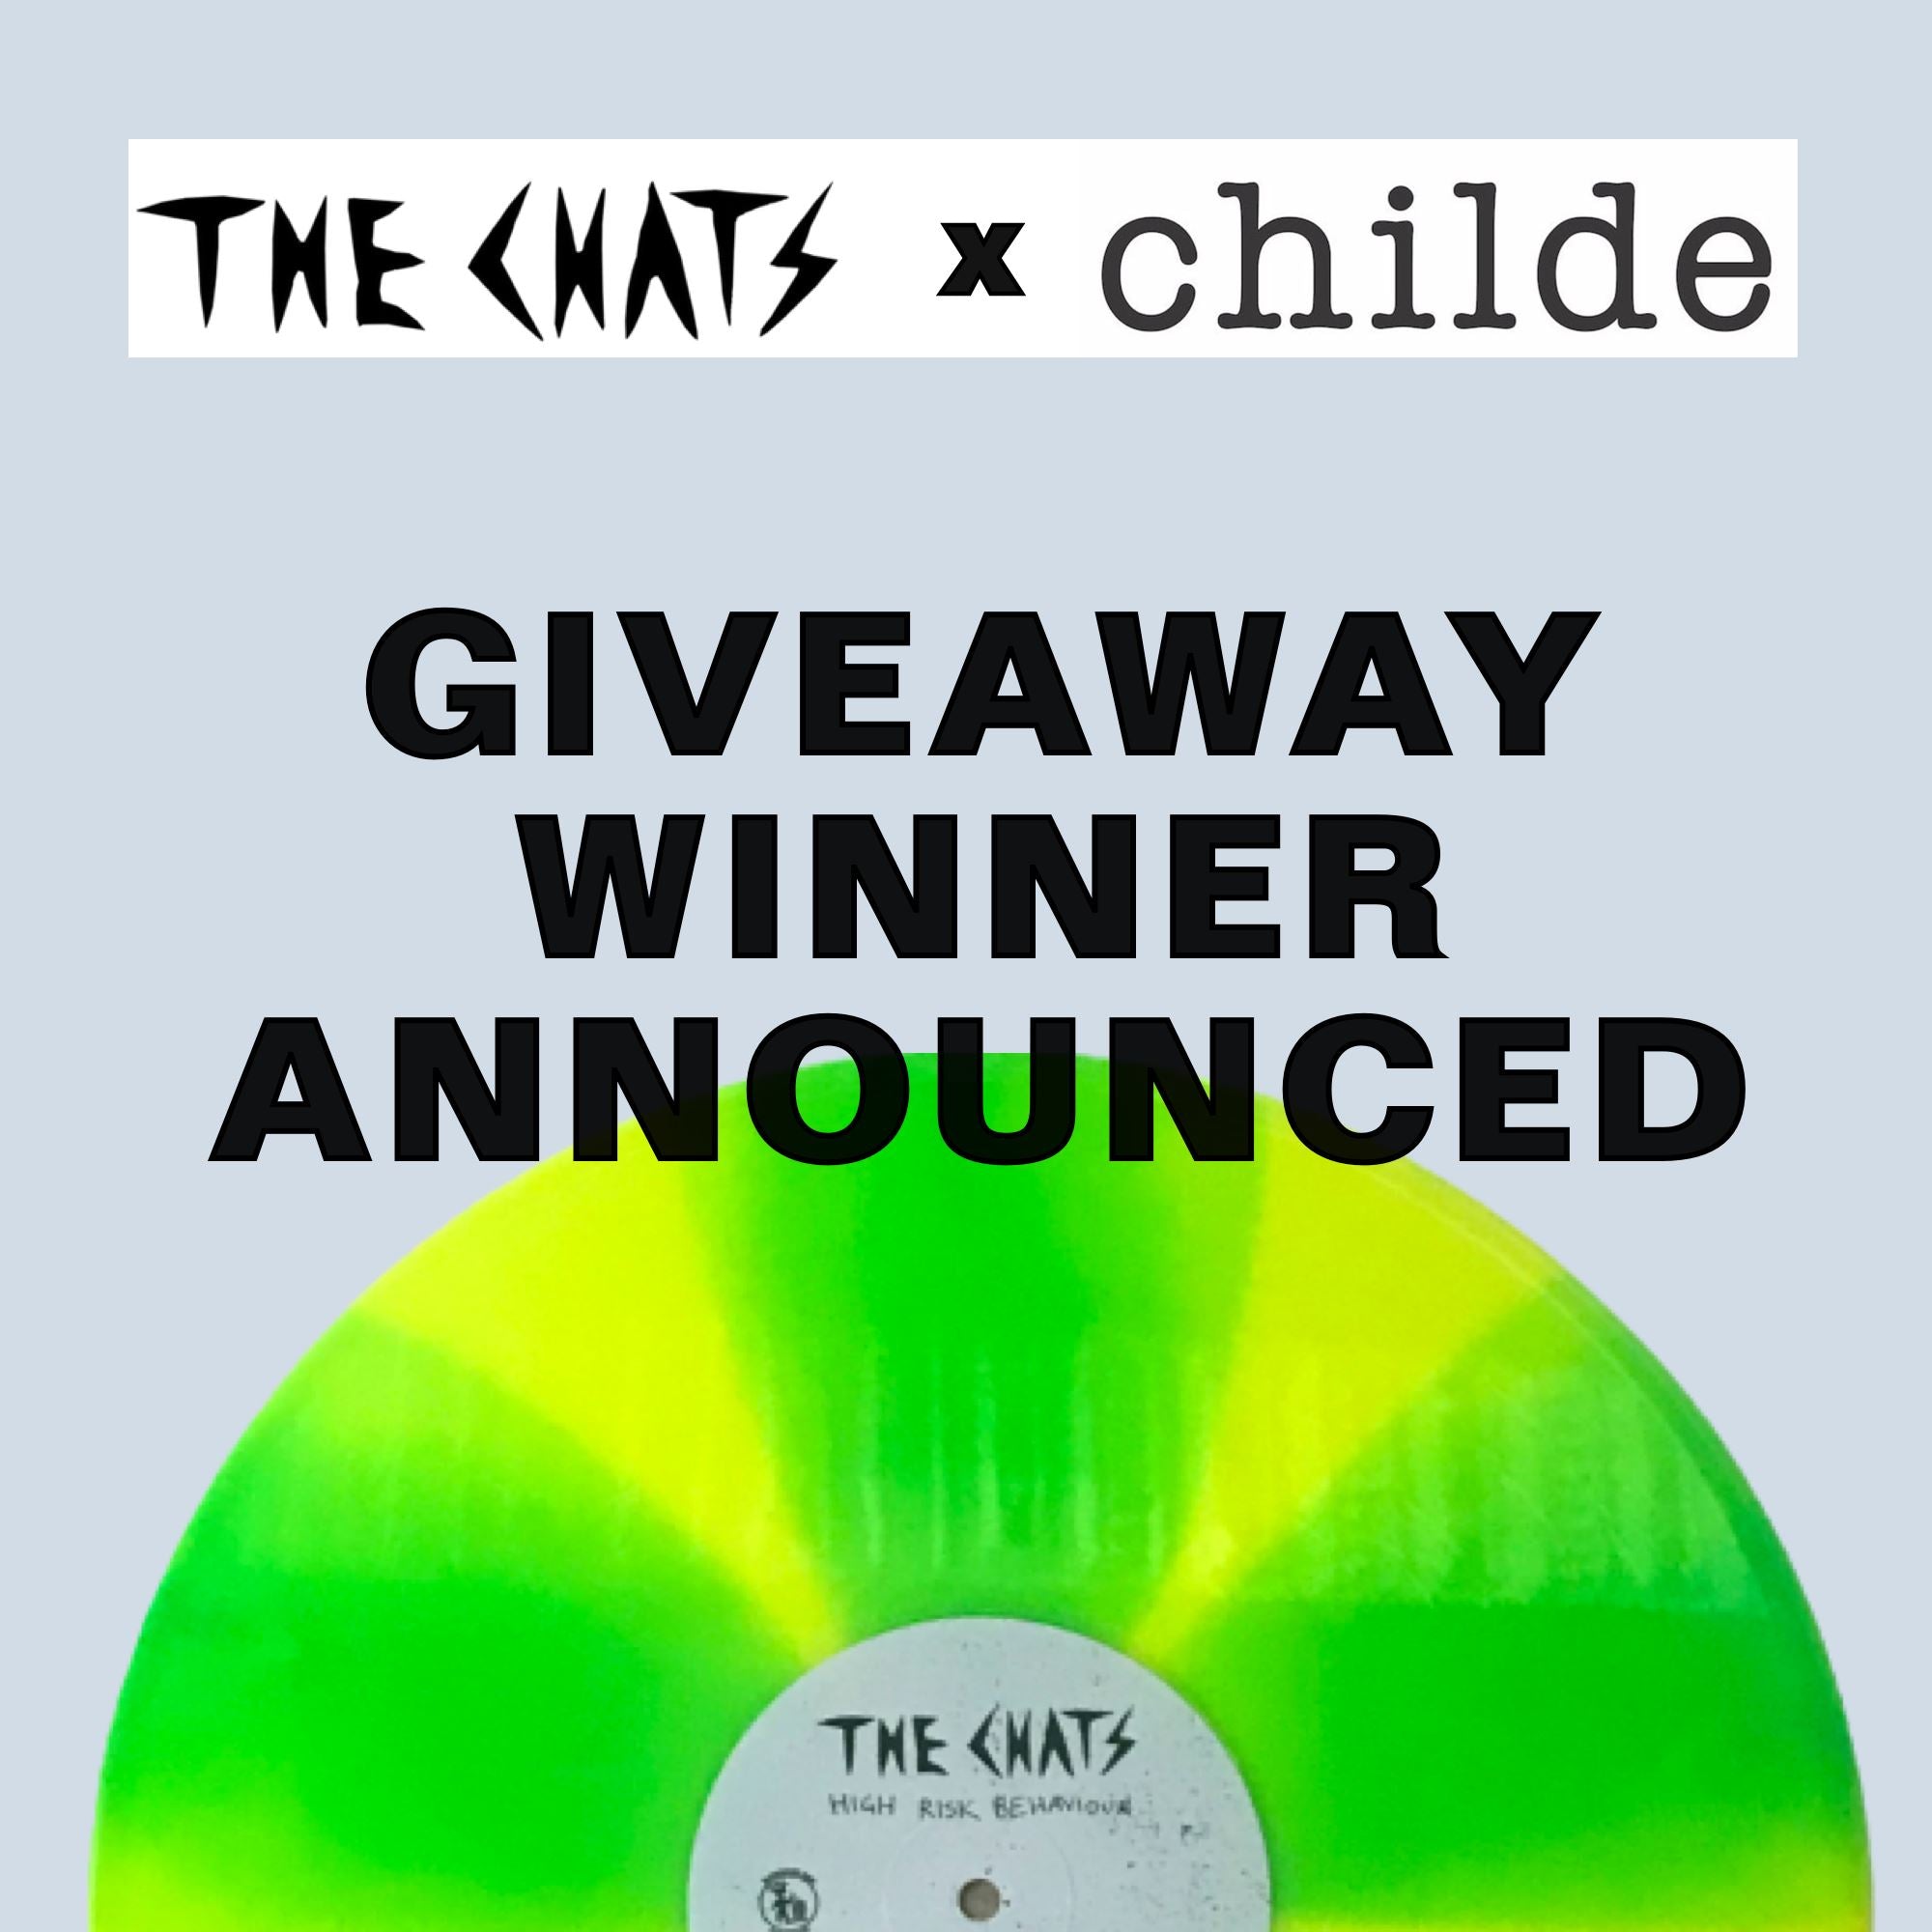 CHILDE x THE  CHATS GIVEAWAY - Winner Announced